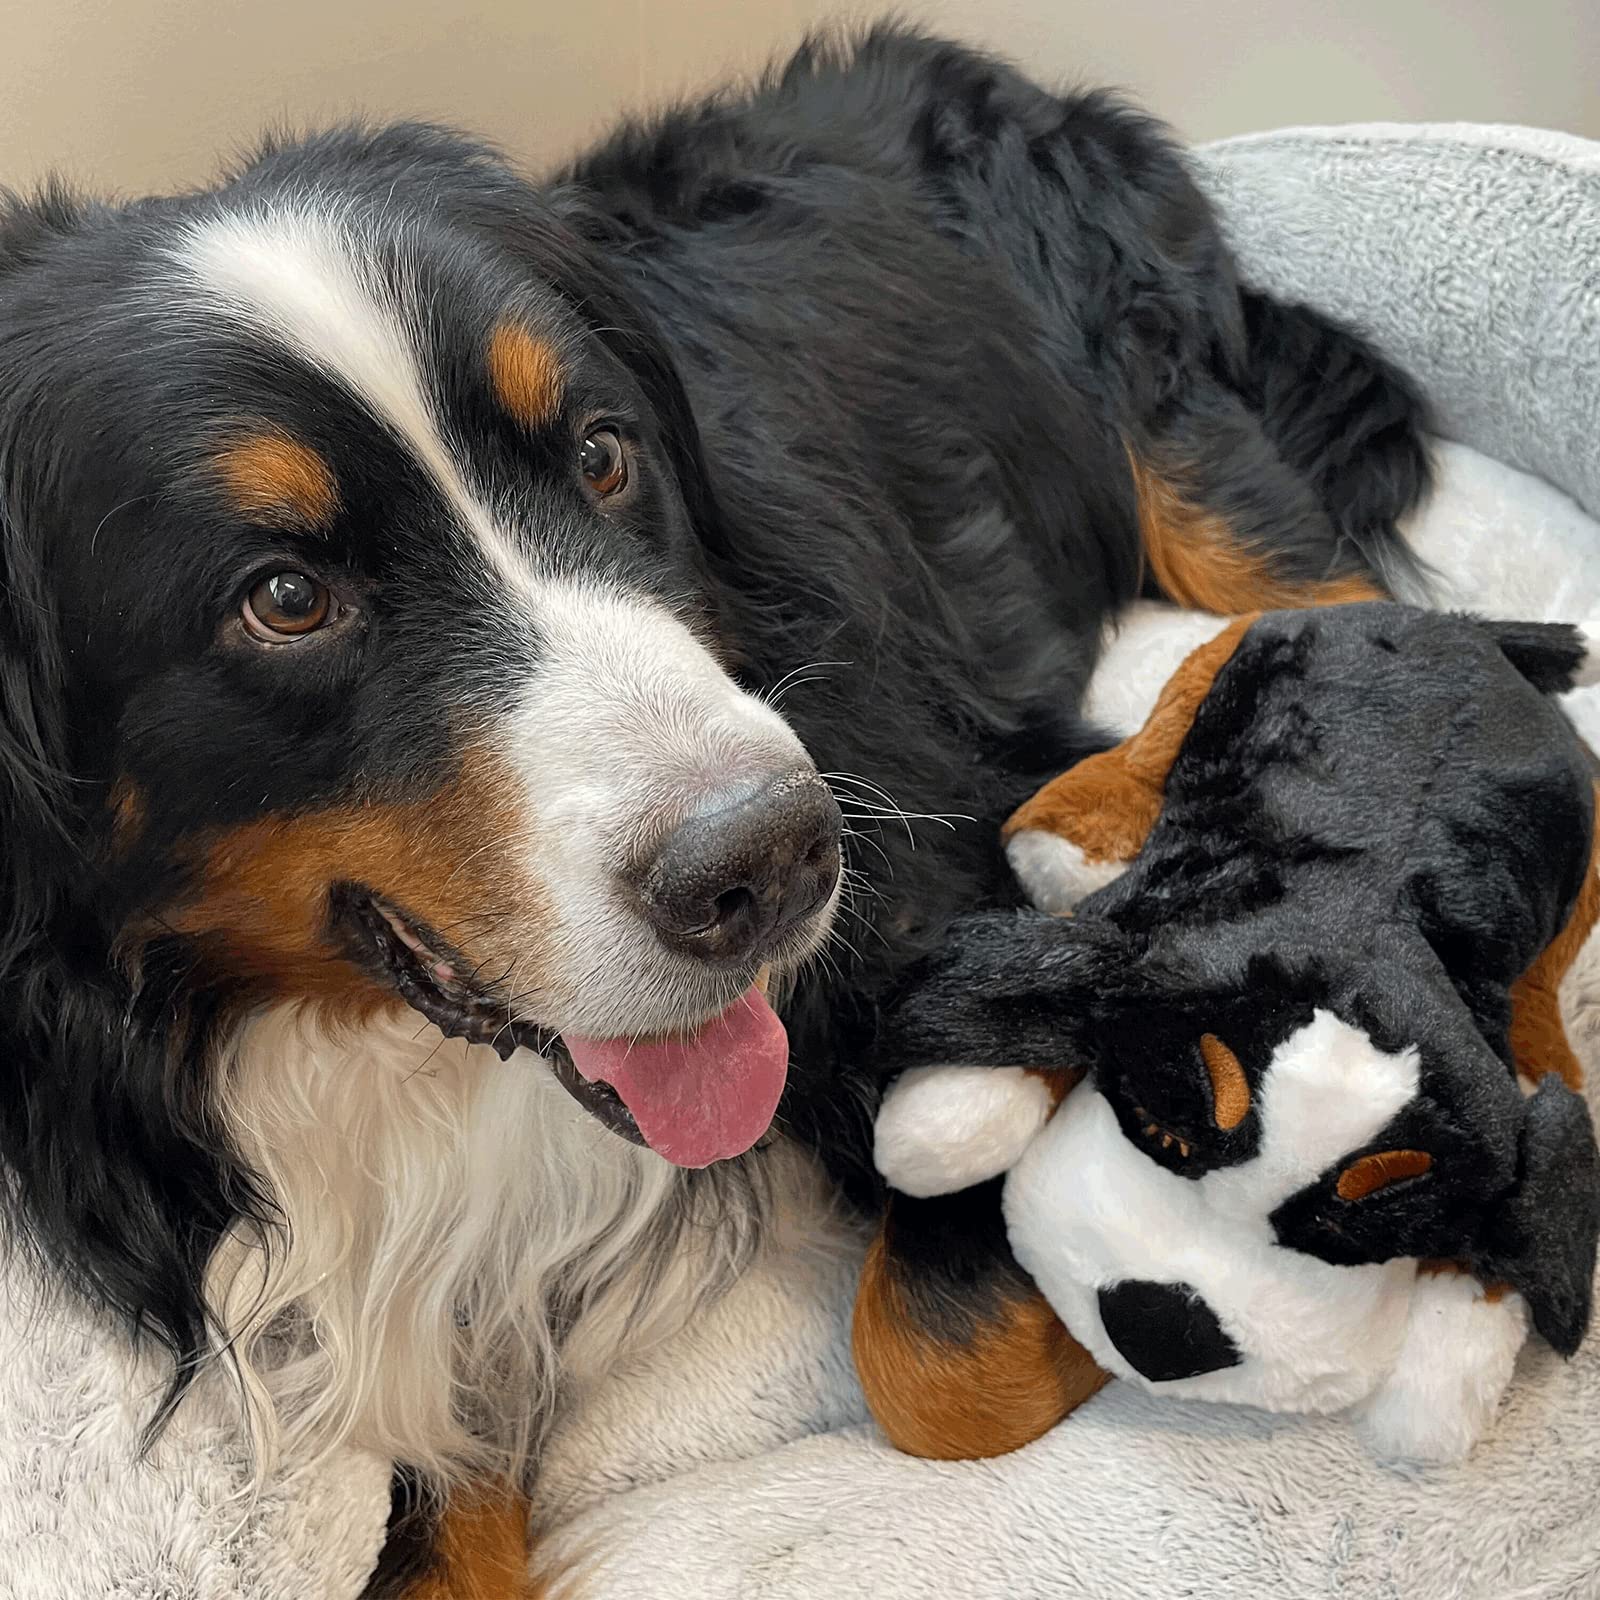 Snuggle Puppy PLUS with 3 Heat Packs & ALL NEW Smartbeat Motion Activated RealFeel Heartbeat, Pet Anxiety Relief and Calming Aid - Comfort Toy for Behavioral Training (Bernese)